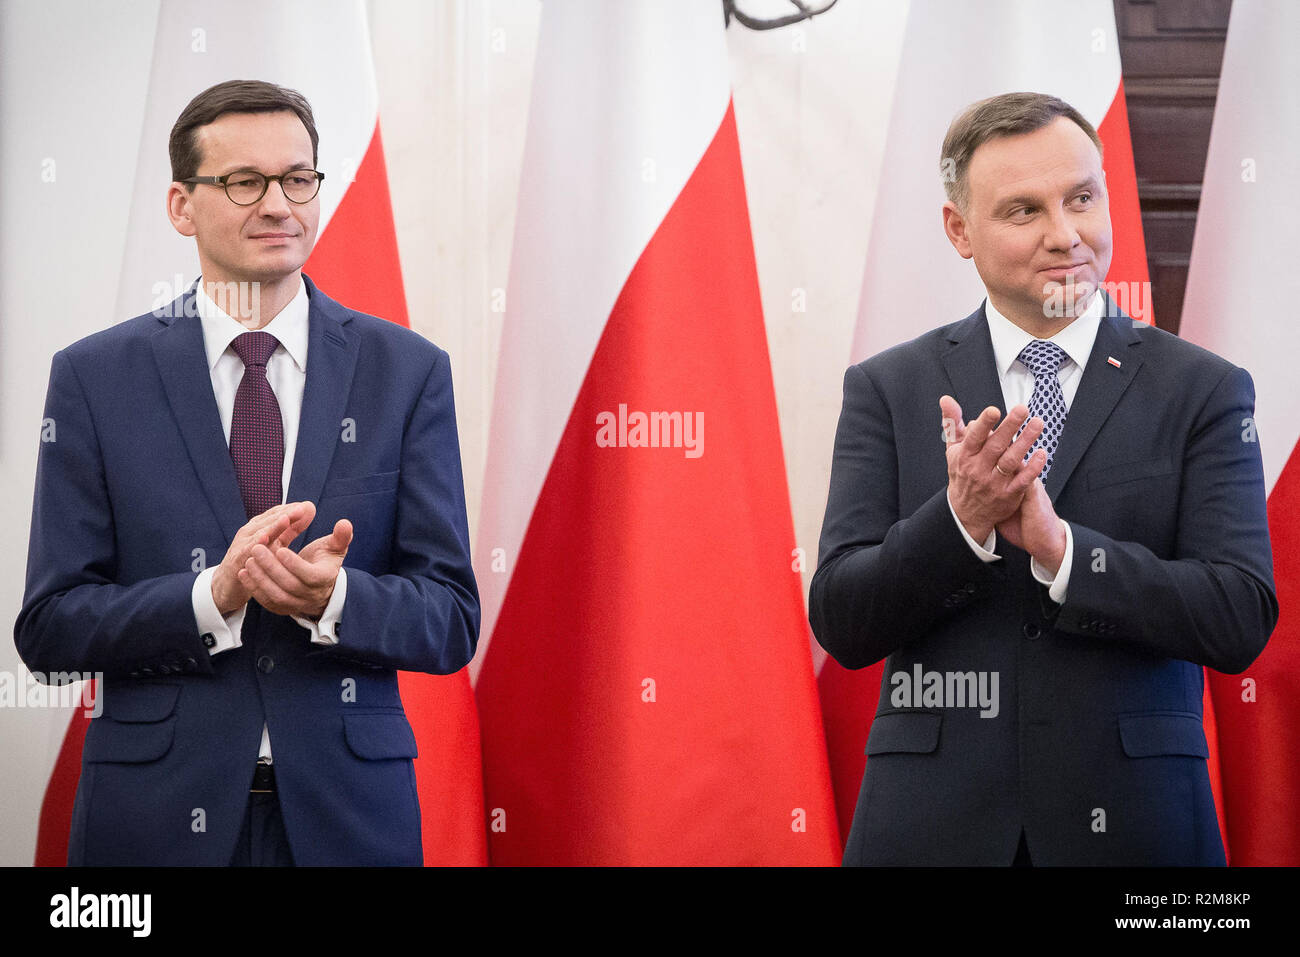 Prime Minister of Poland Mateusz Morawiecki and President of Poland Andrzej Duda during the ceremony of appointing new members of Social Dialogue Council at Presidential Palace in Warsaw, Poland on 07 February 2018 Stock Photo